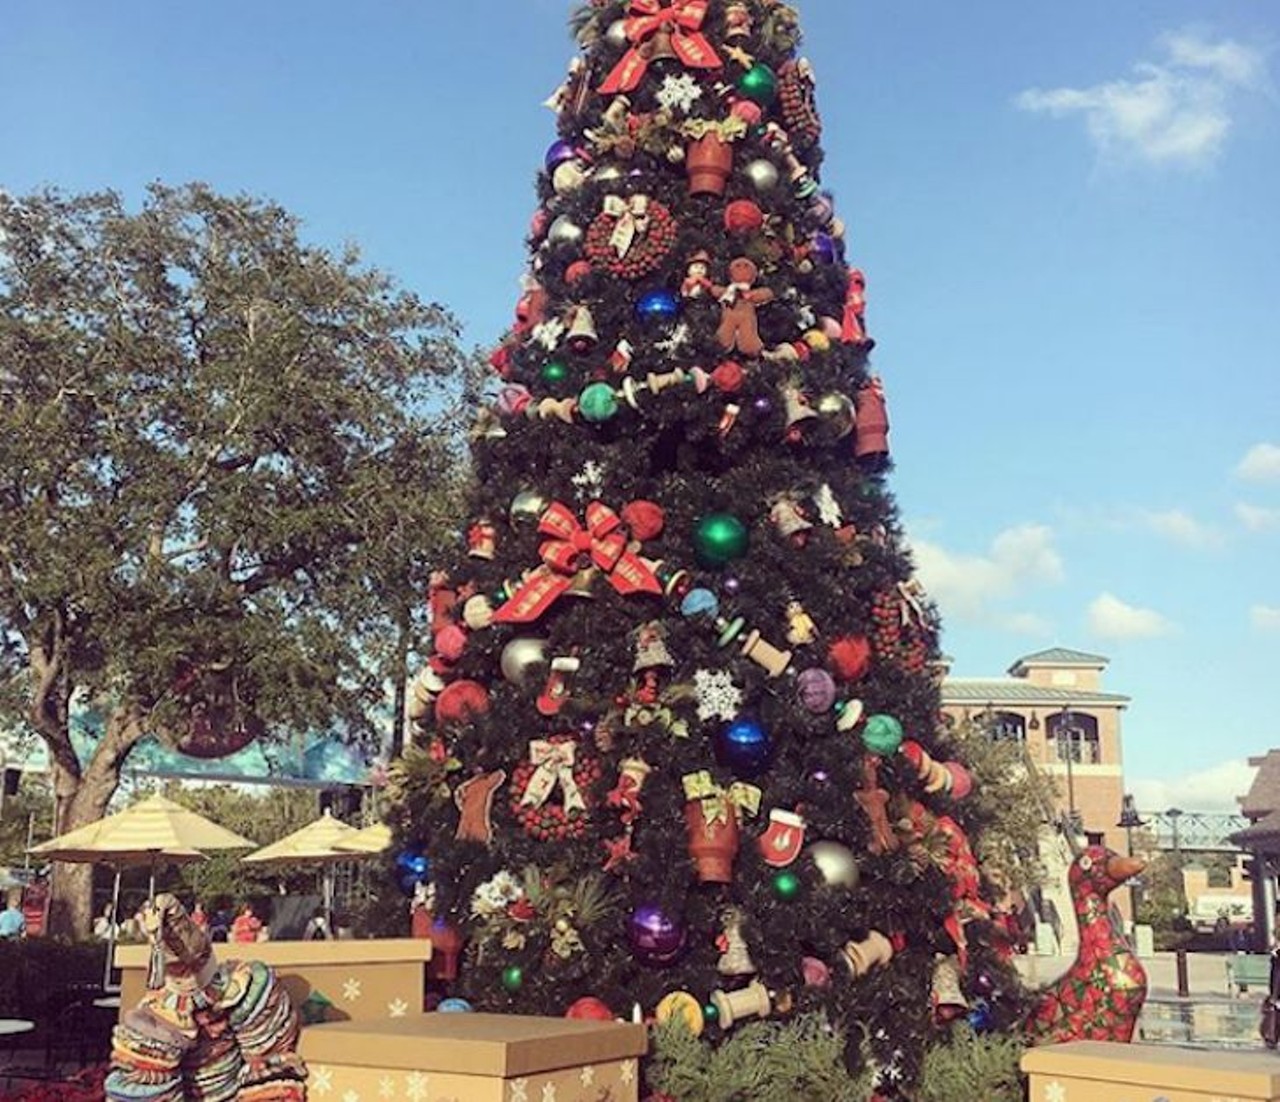 Holidays at Disney Springs
1486 Buena Vista Dr. 
November 10, 2017 - January 7, 2018
Disney Springs&#146; holiday festivities are a great way to enjoy theme park Christmas fun without splurging on ticket prices. Walk through the Christmas tree trail with Disney-themed trees, falling snow and music.
Photo via kyleeyalexandra/Instagram